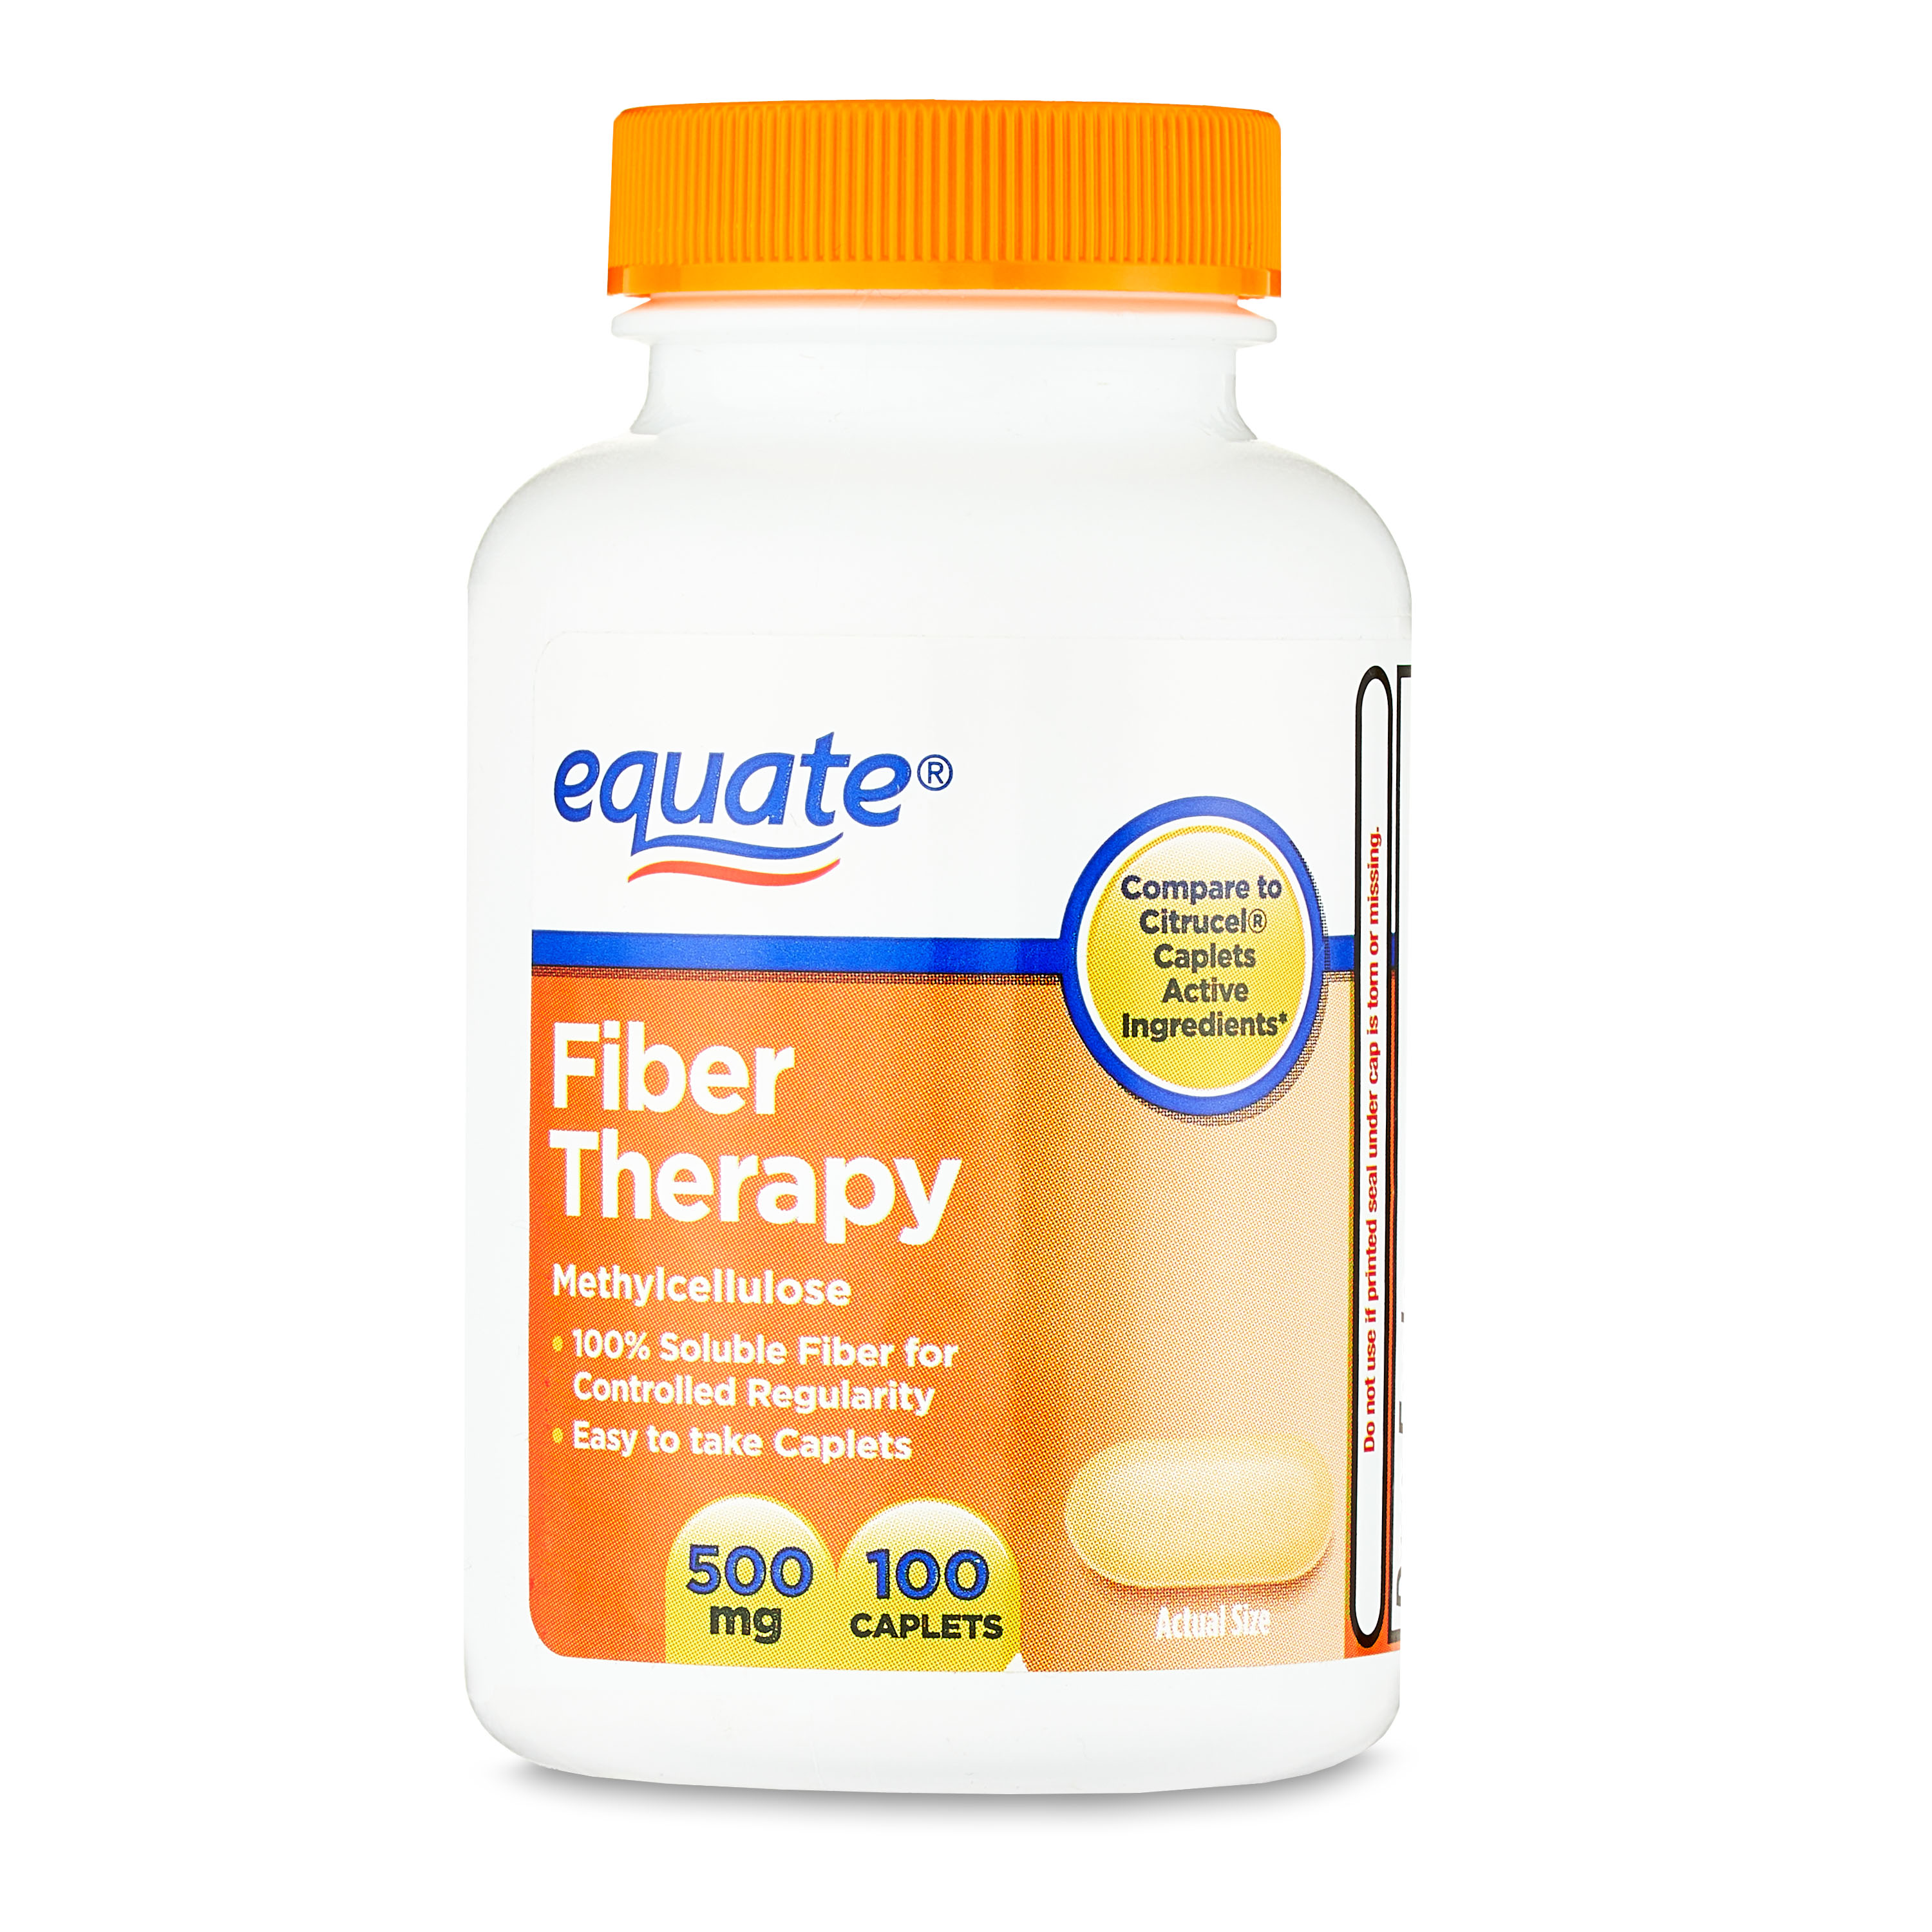 Equate Fiber Therapy Methylcellulose Caplets, 500 mg, 100 Count - image 1 of 9